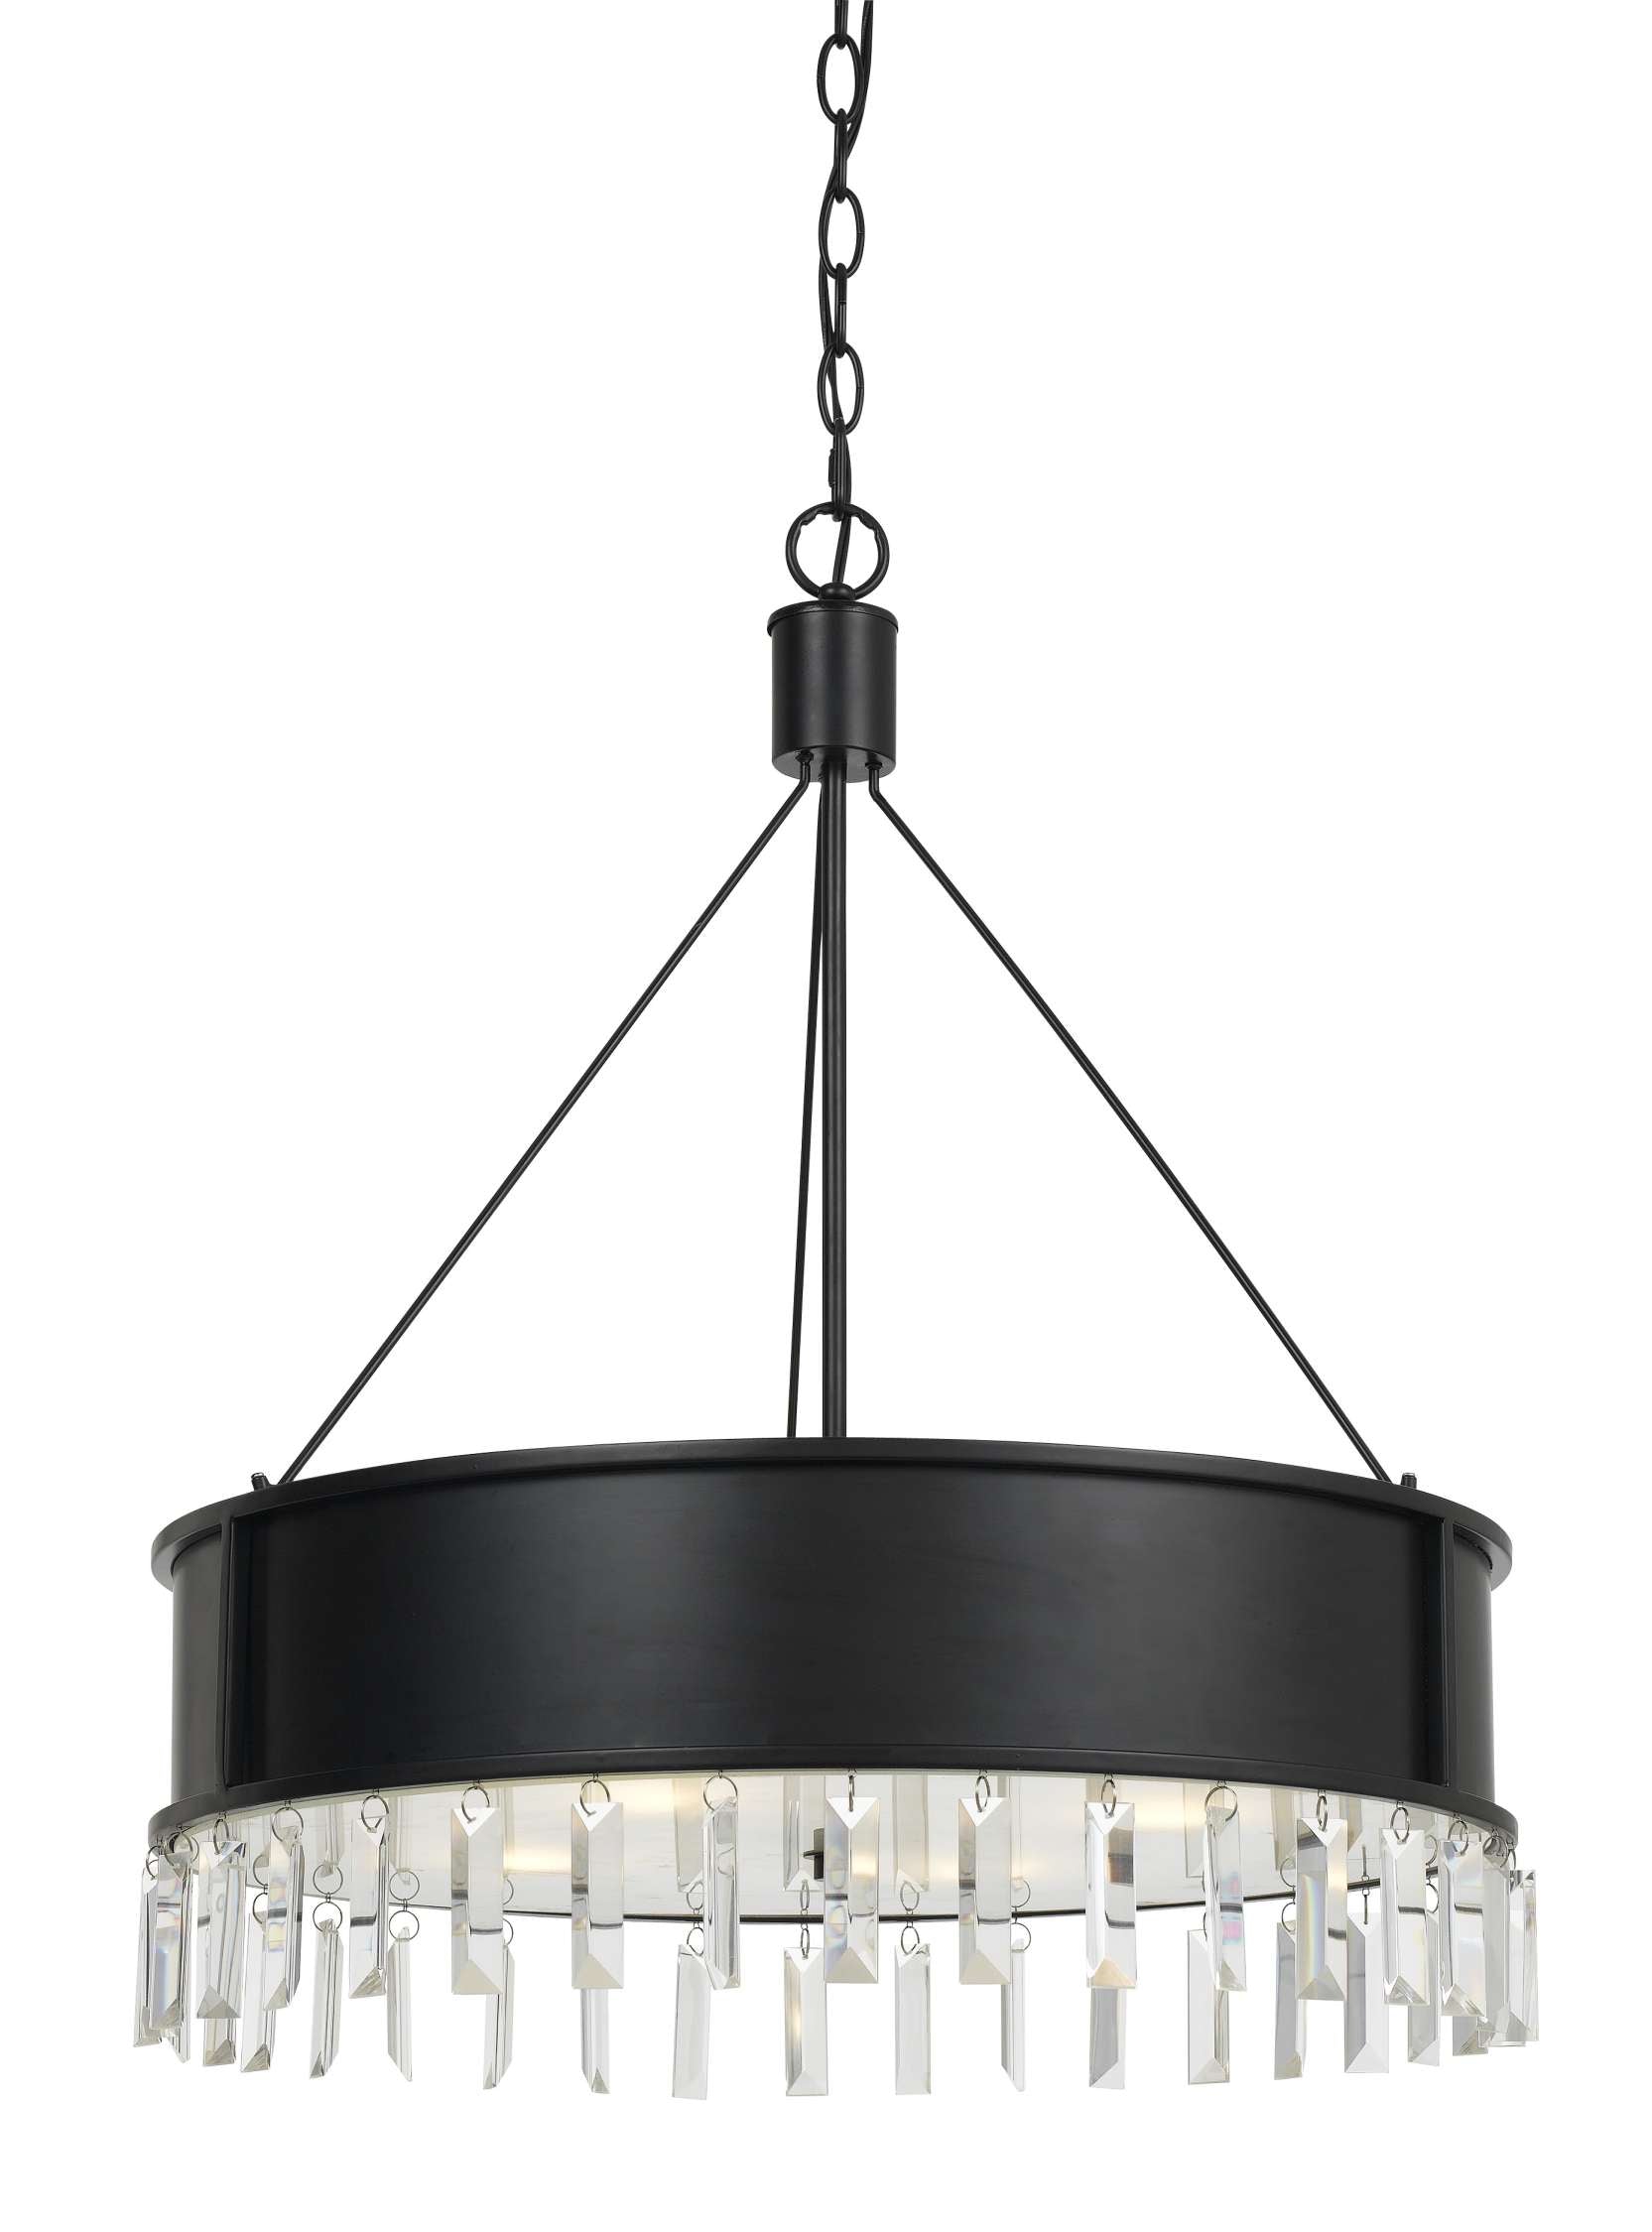 4 Bulb Round Metal Body Chandelier With Hanging Crystal Accents, Black By Benzara